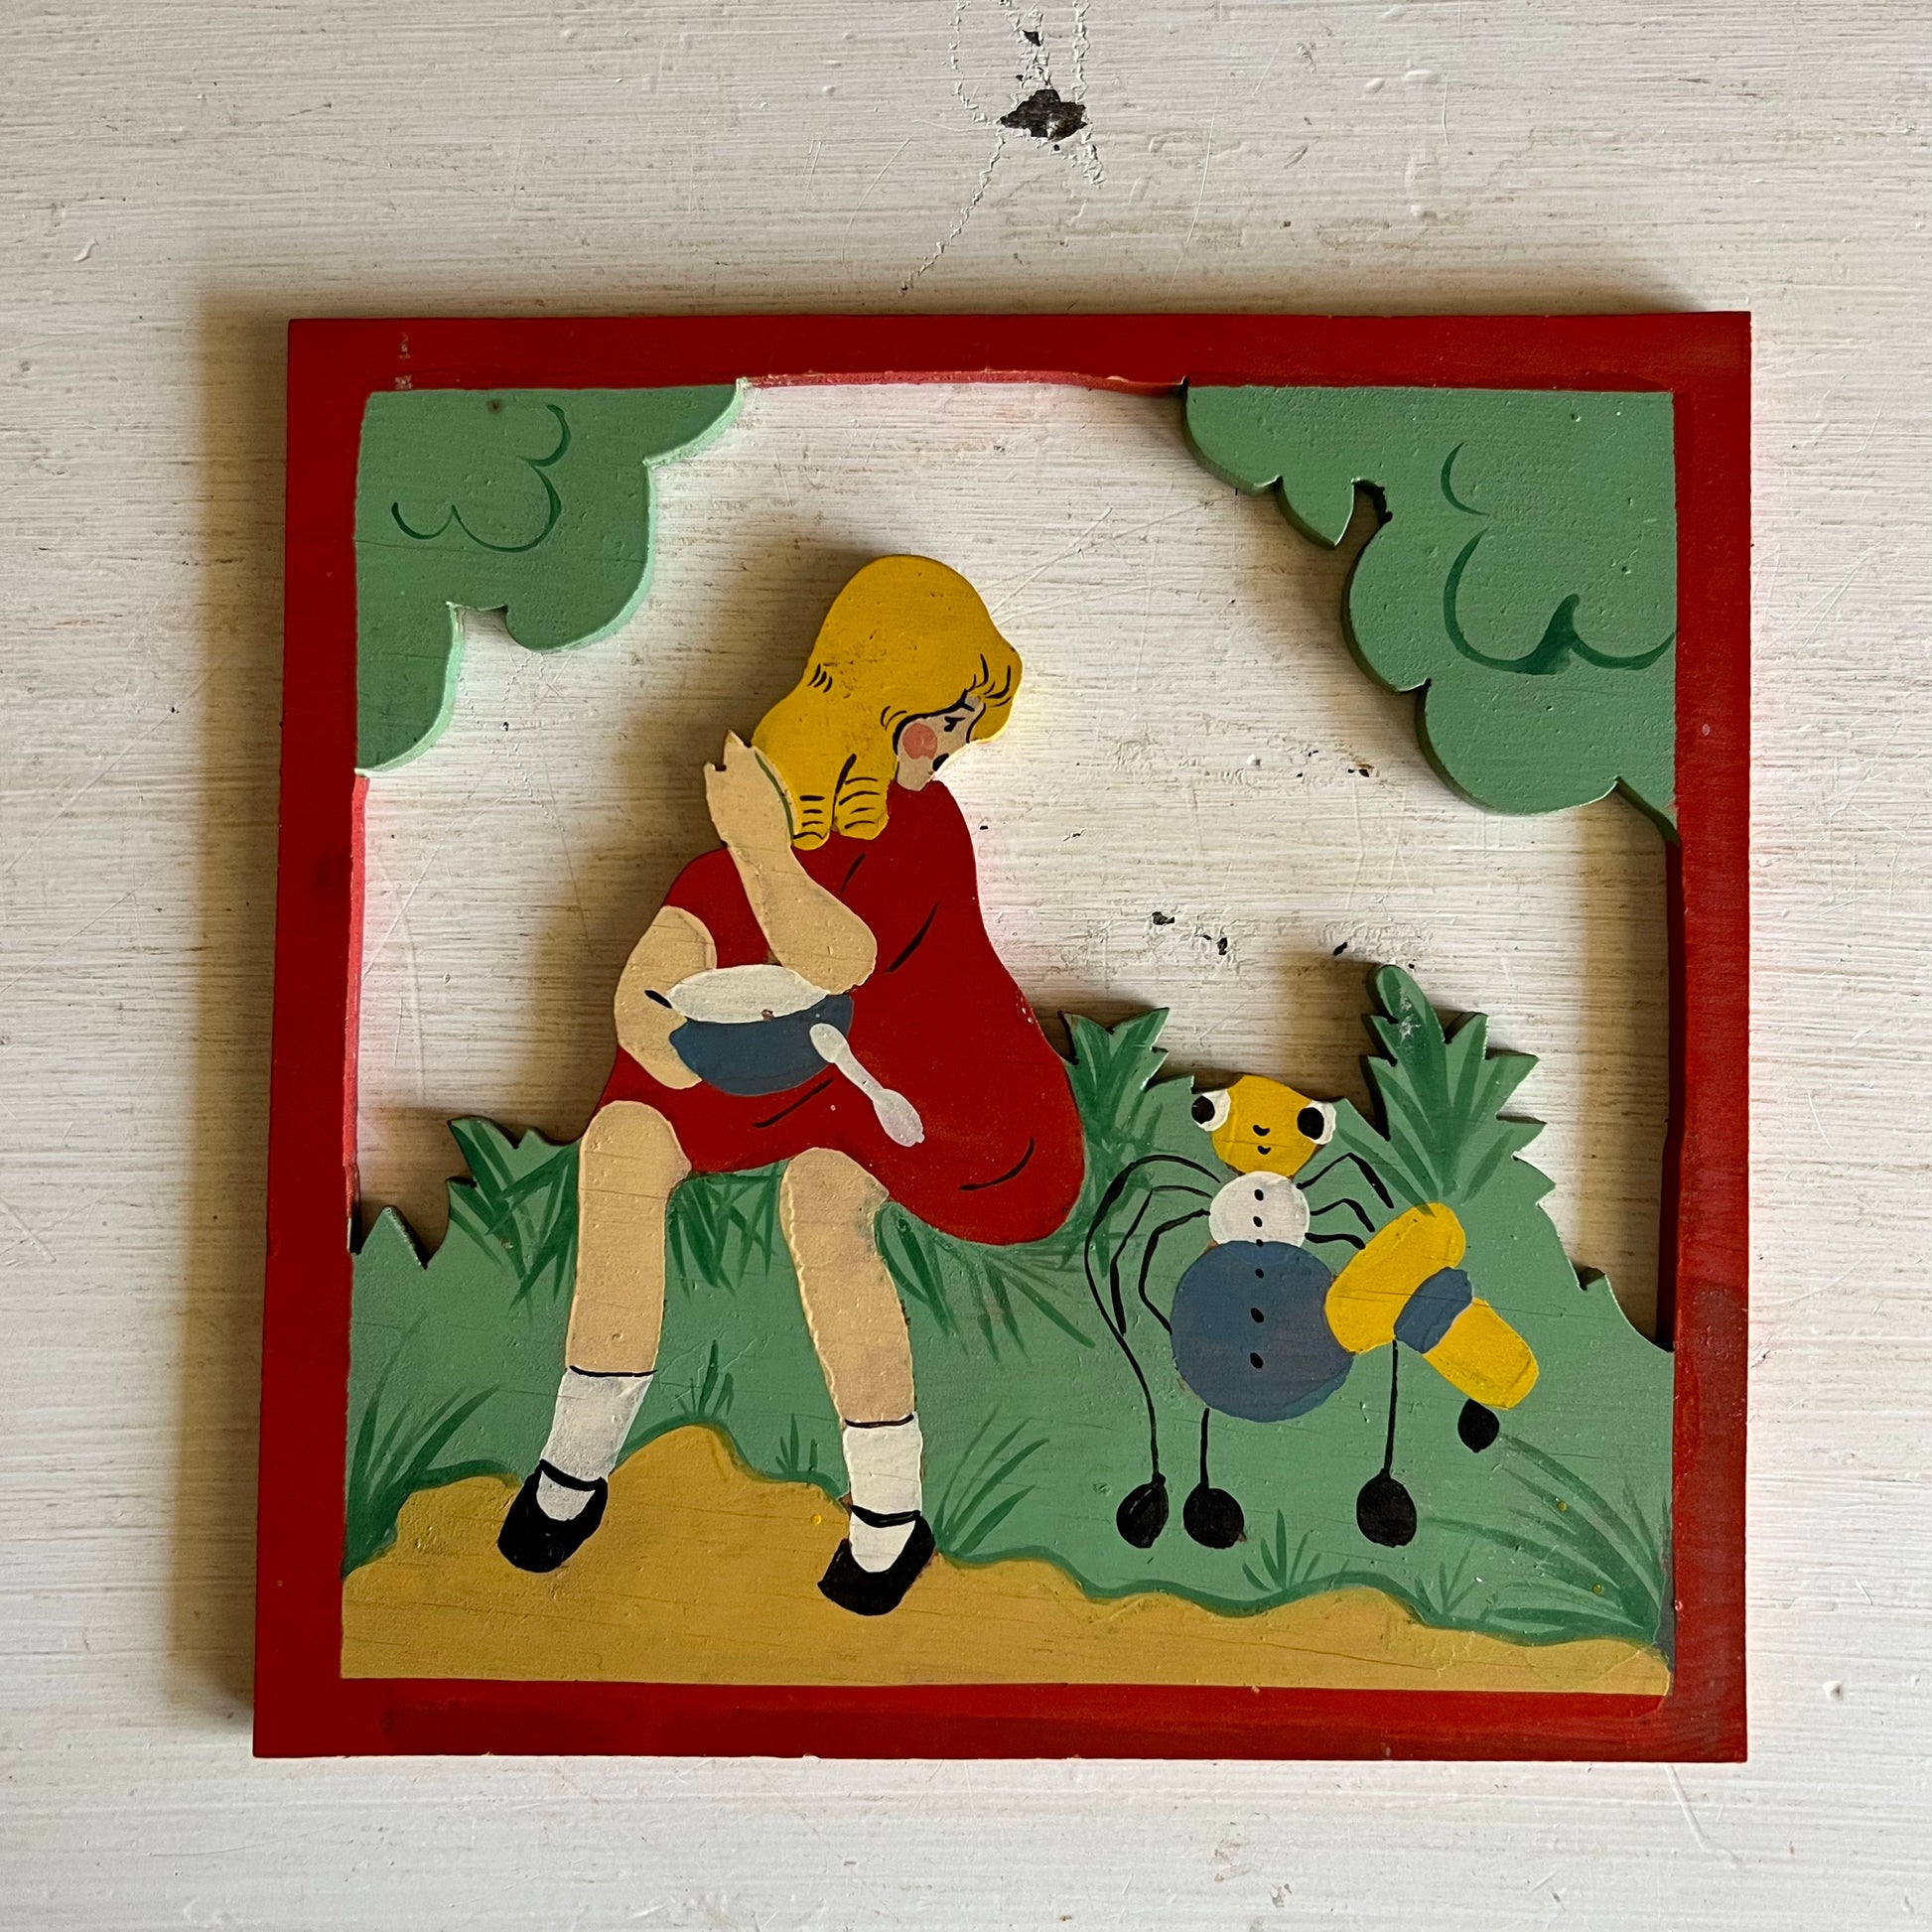 Rustic Hand Crafted Little Miss Muffet Wooden Cut Out